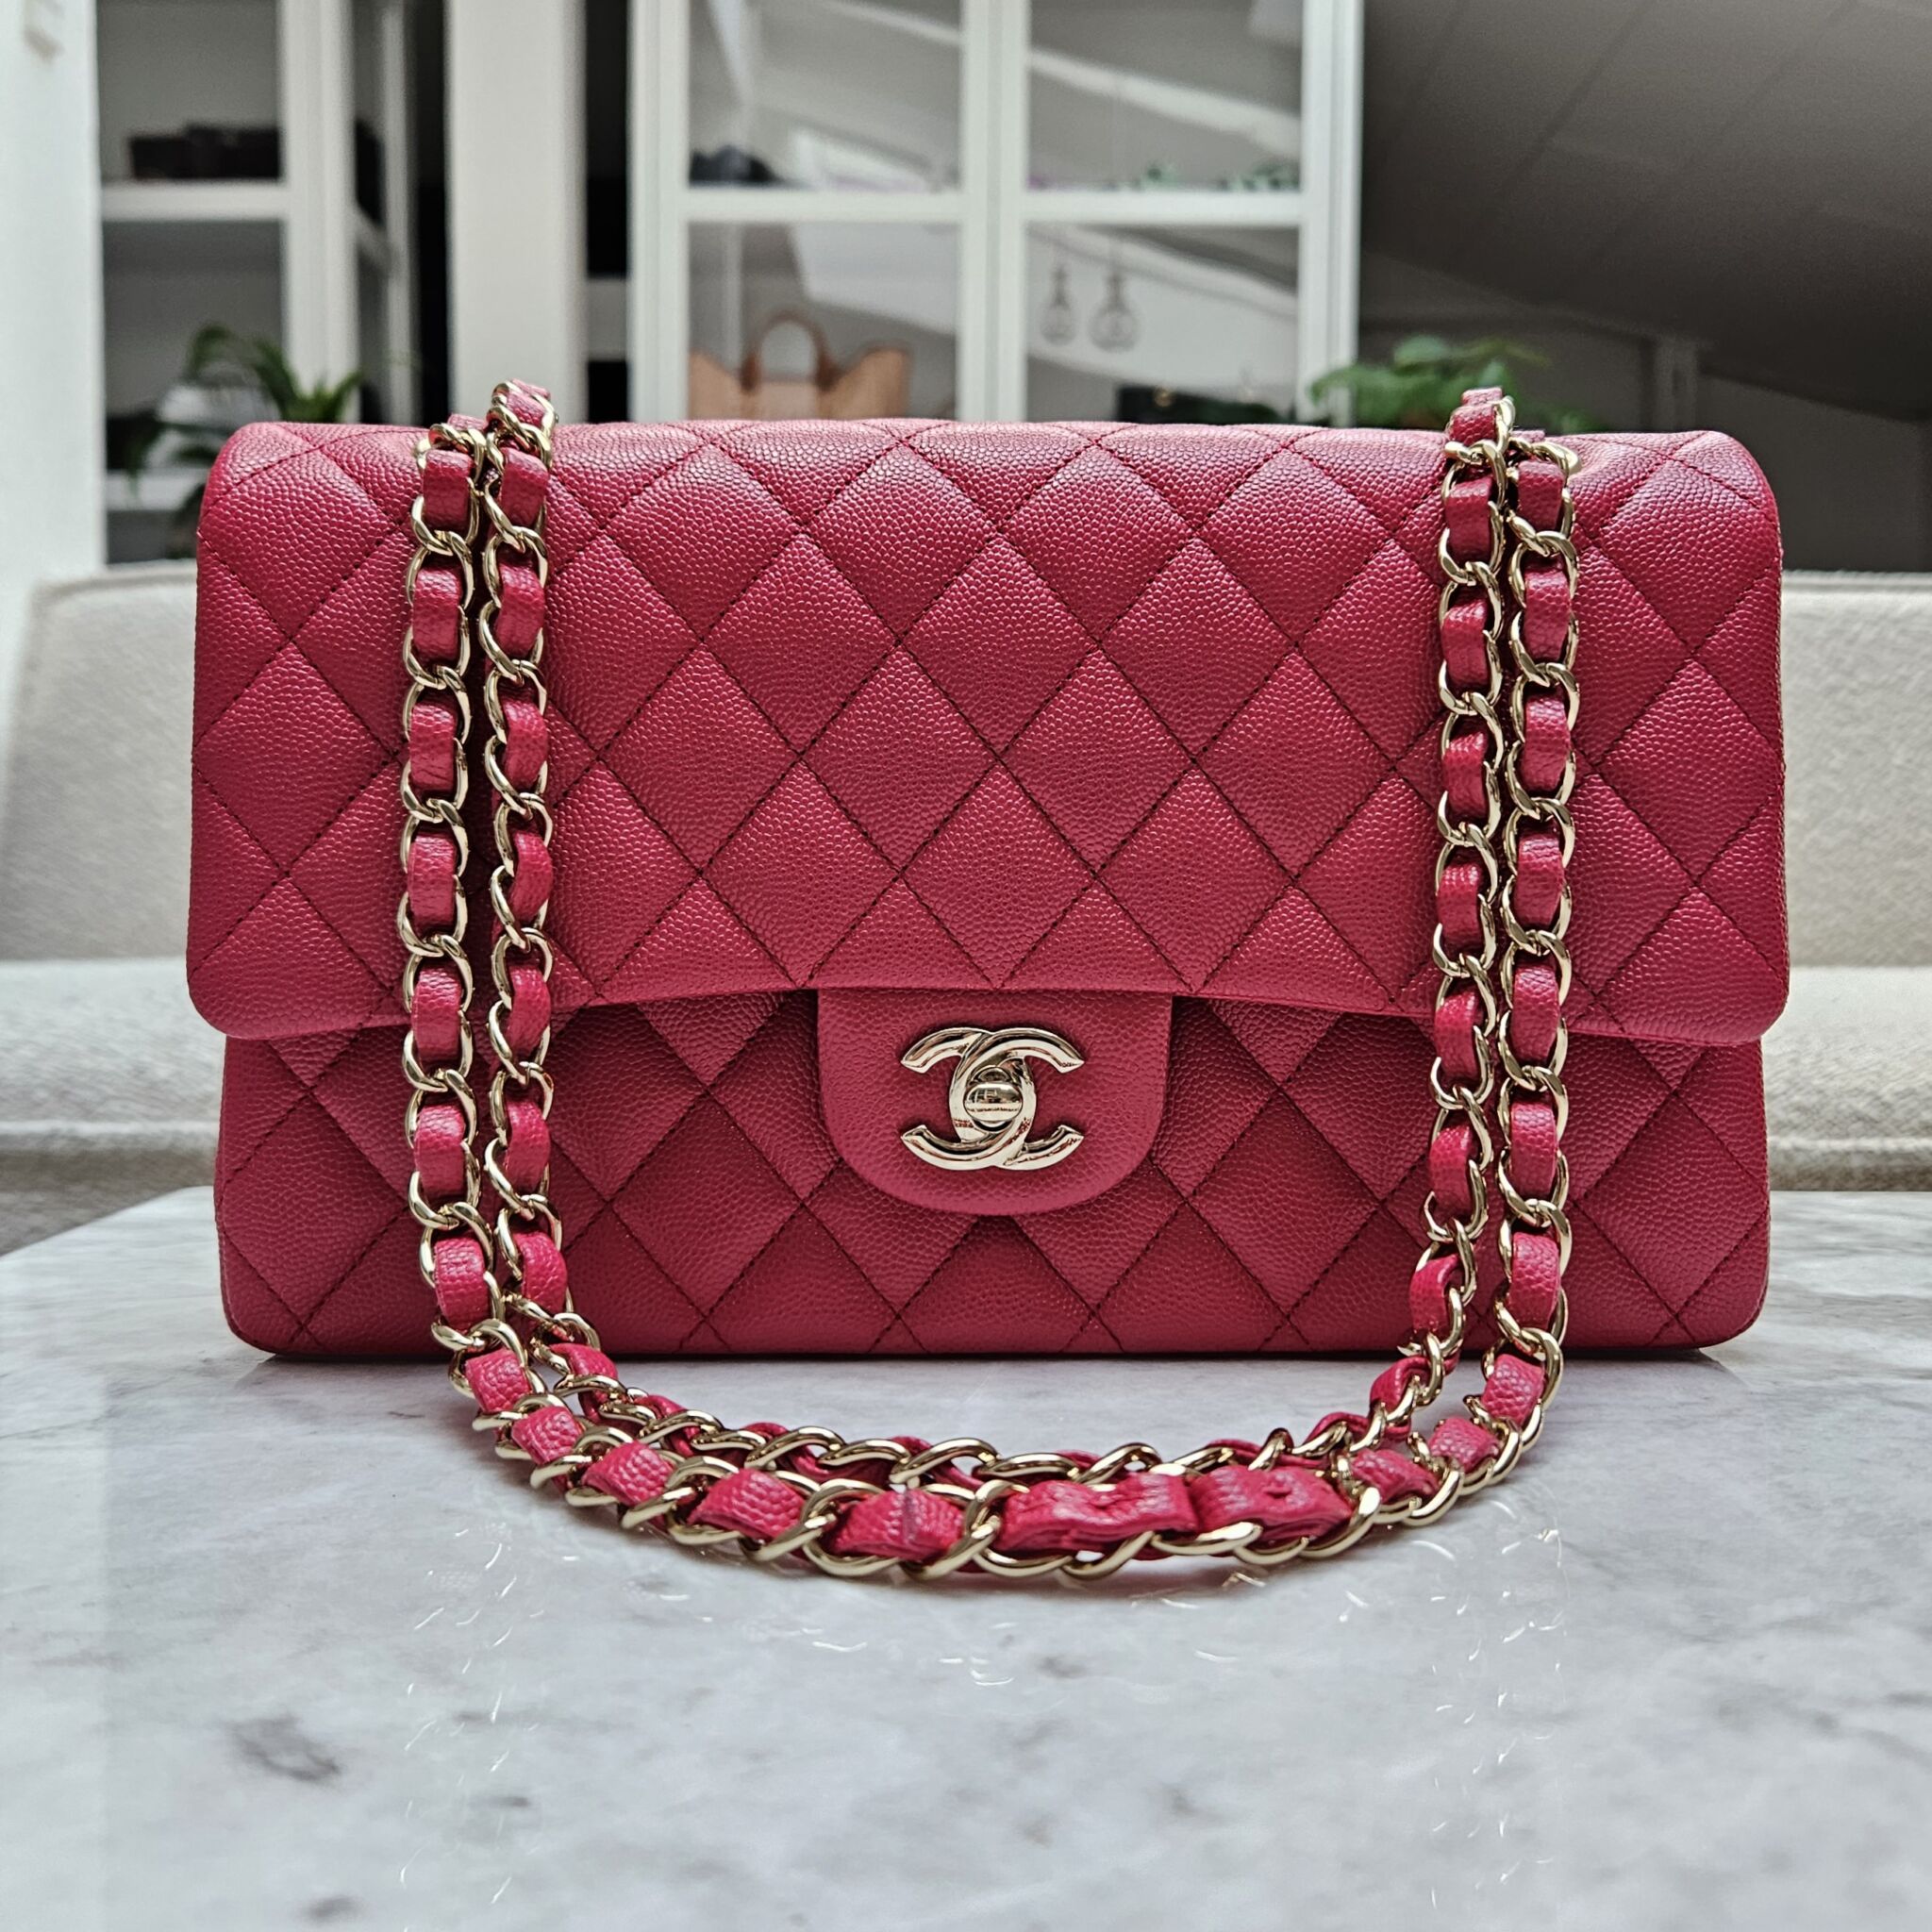 Coco Handle Small Caviar Pink GHW